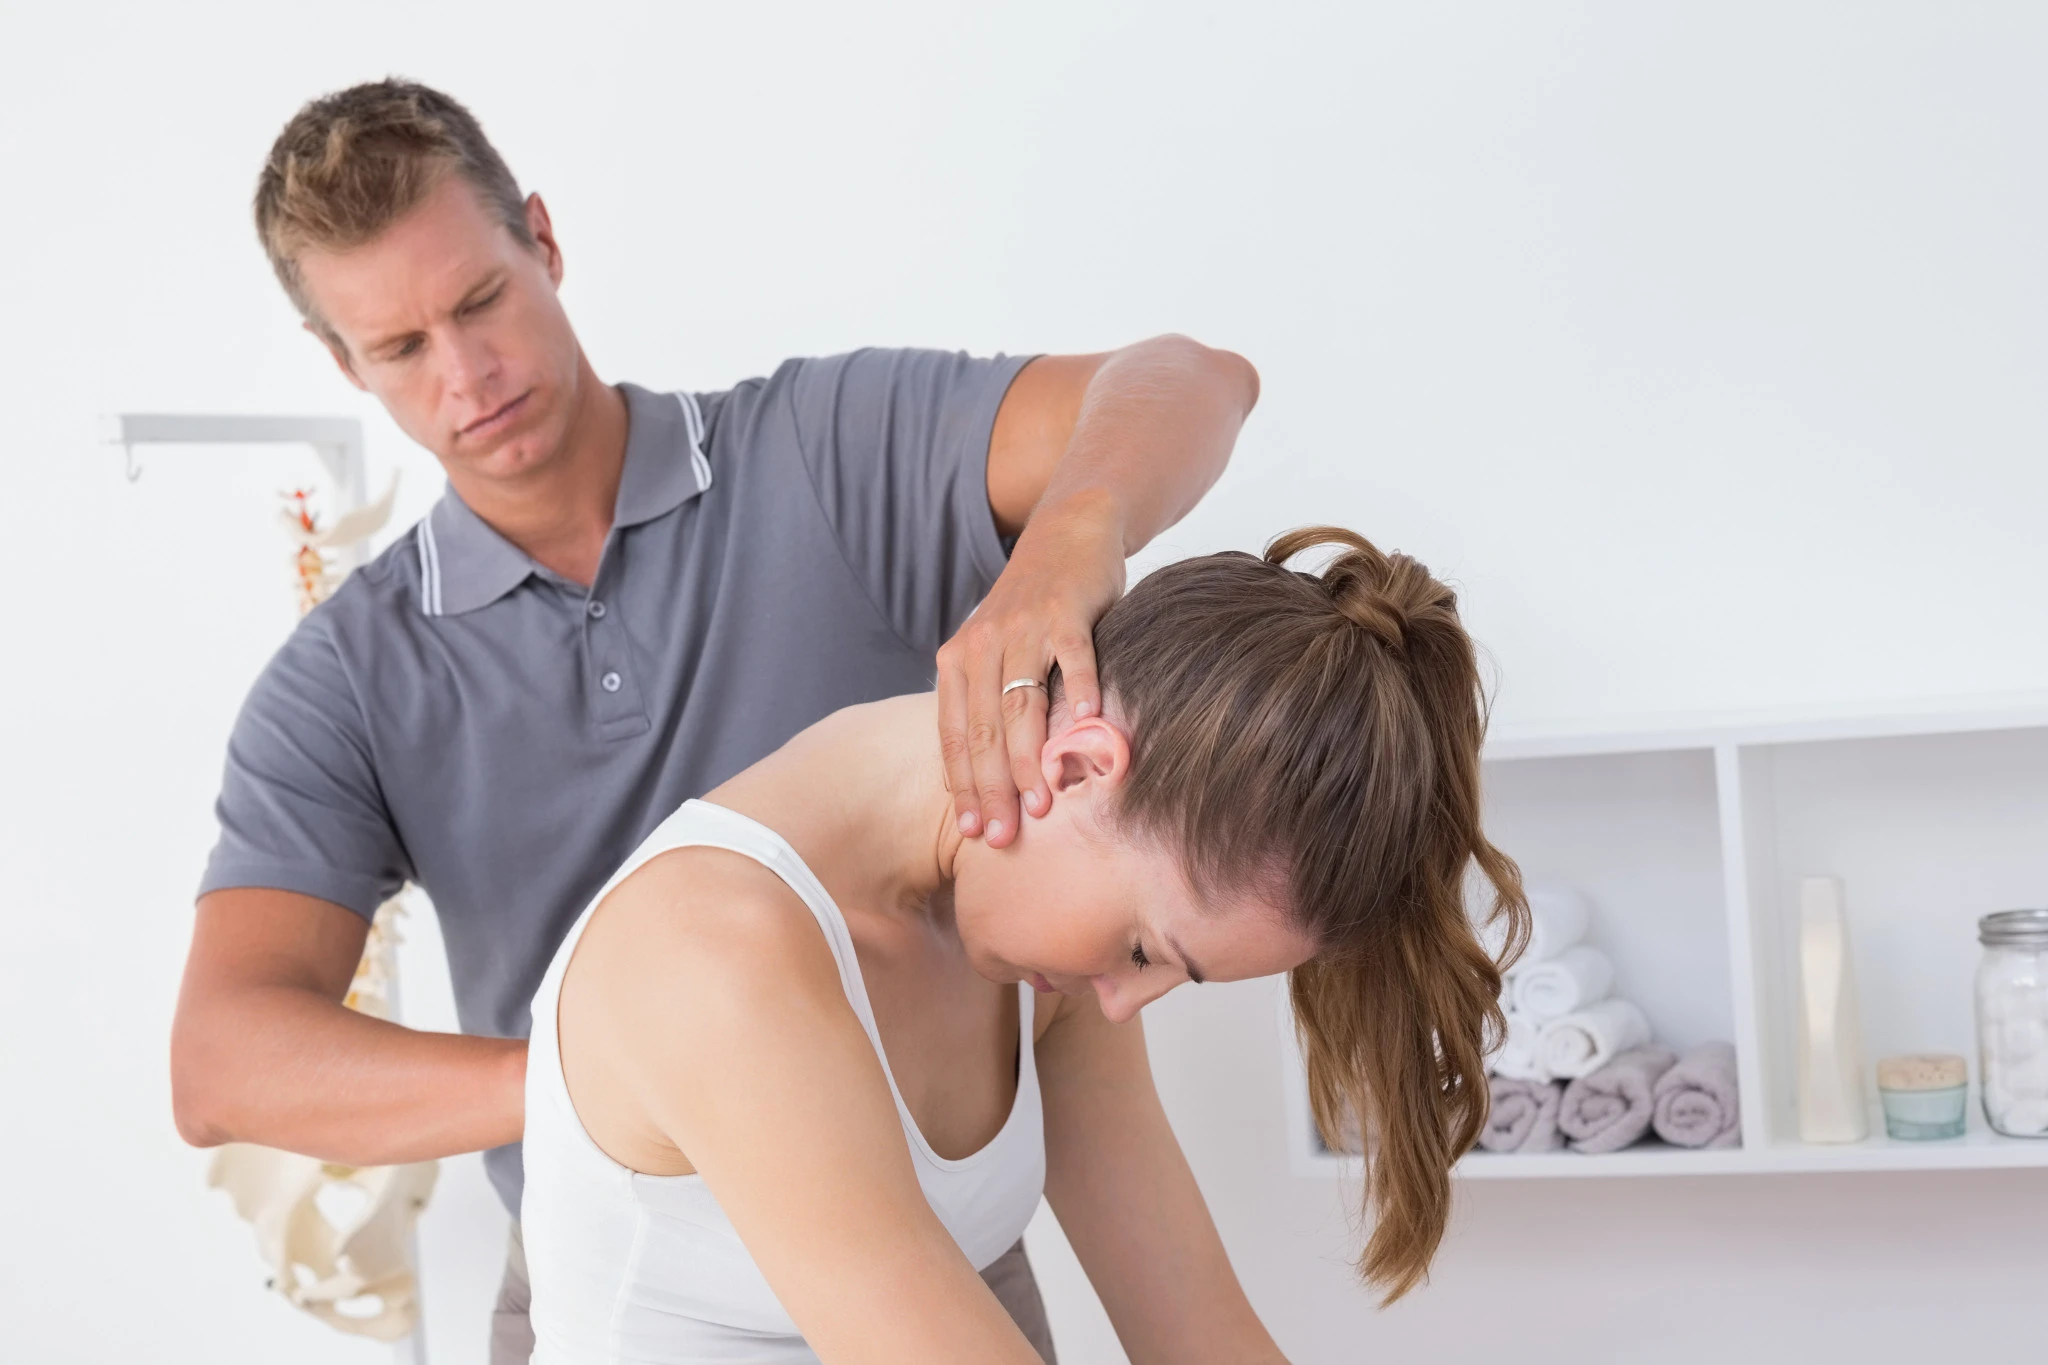 Physical Therapy for Neck Pain Relief | Spine-health